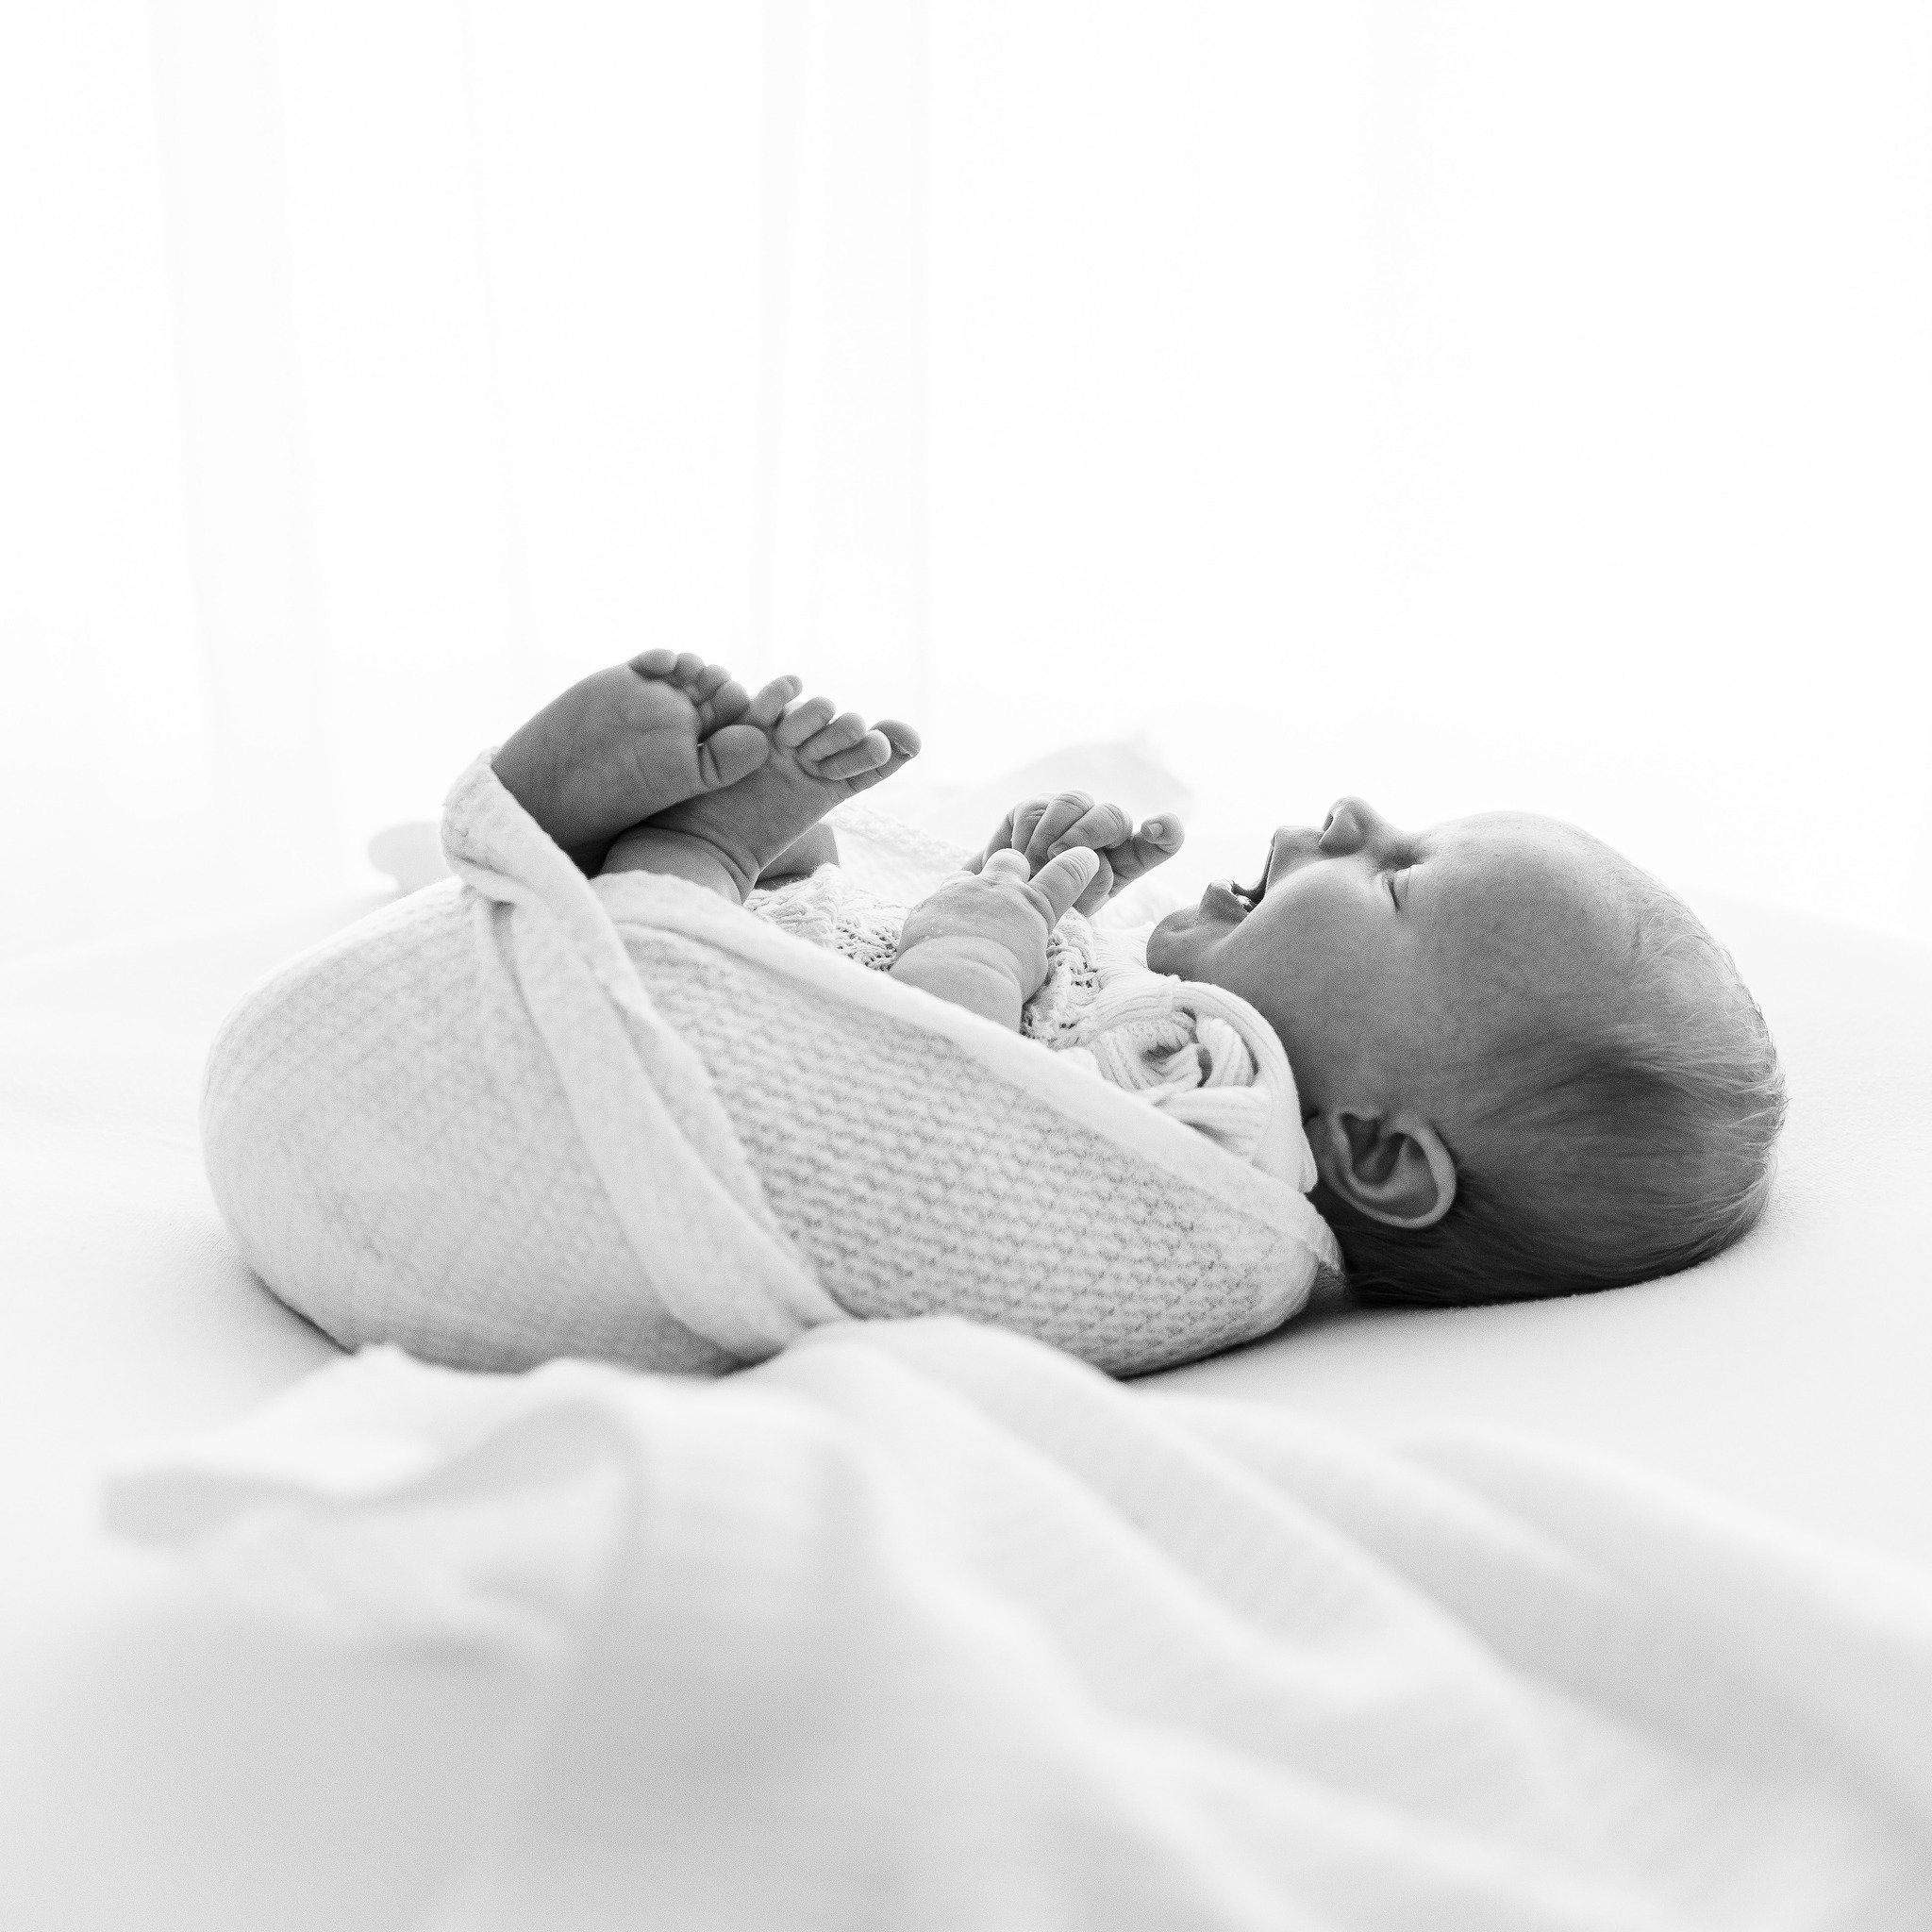 Just a wrapped up little bundle for your Sunday night scolling 🤍

#fifenewbornphotographer #newbornphotographerscotland #edinburghnewbornphotographer #athomebabyphotography #naturalnewbornphotography #blackandwhitebabyphotography #bnw_littles #simpl